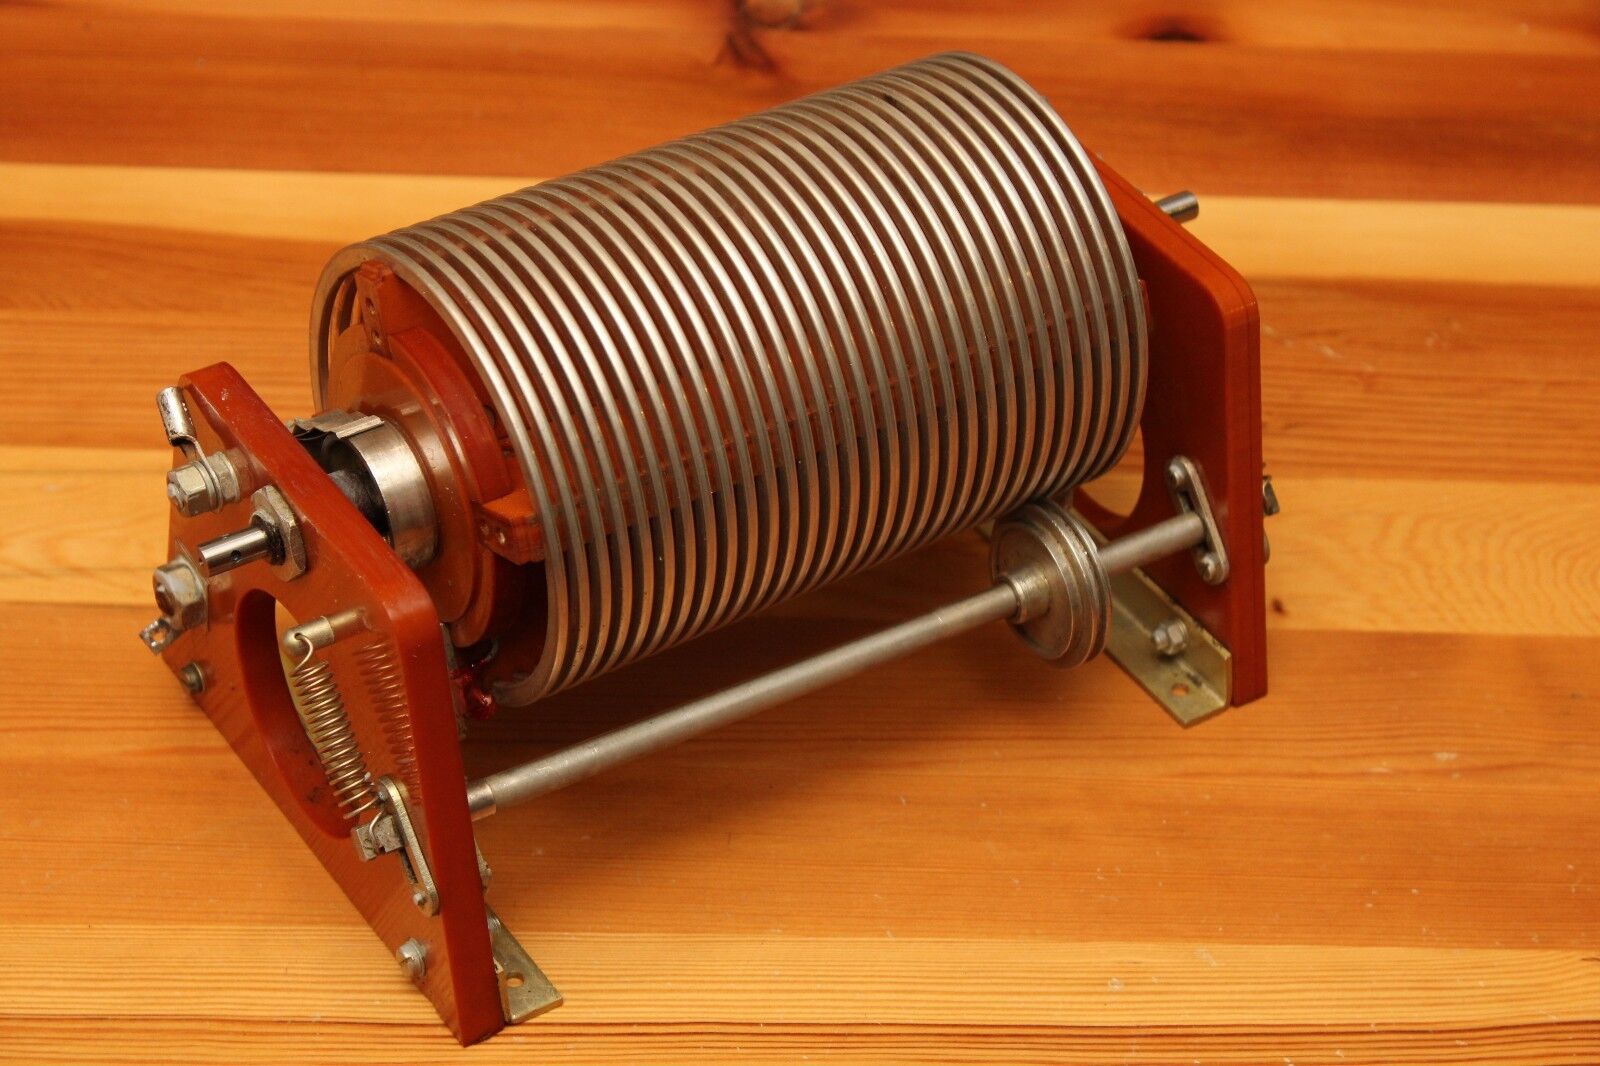 GIANT VARIABLE ROLLER INDUCTOR COIL - HF POWER AMPLIFIER - ANTENNA TUNER  HI PWR